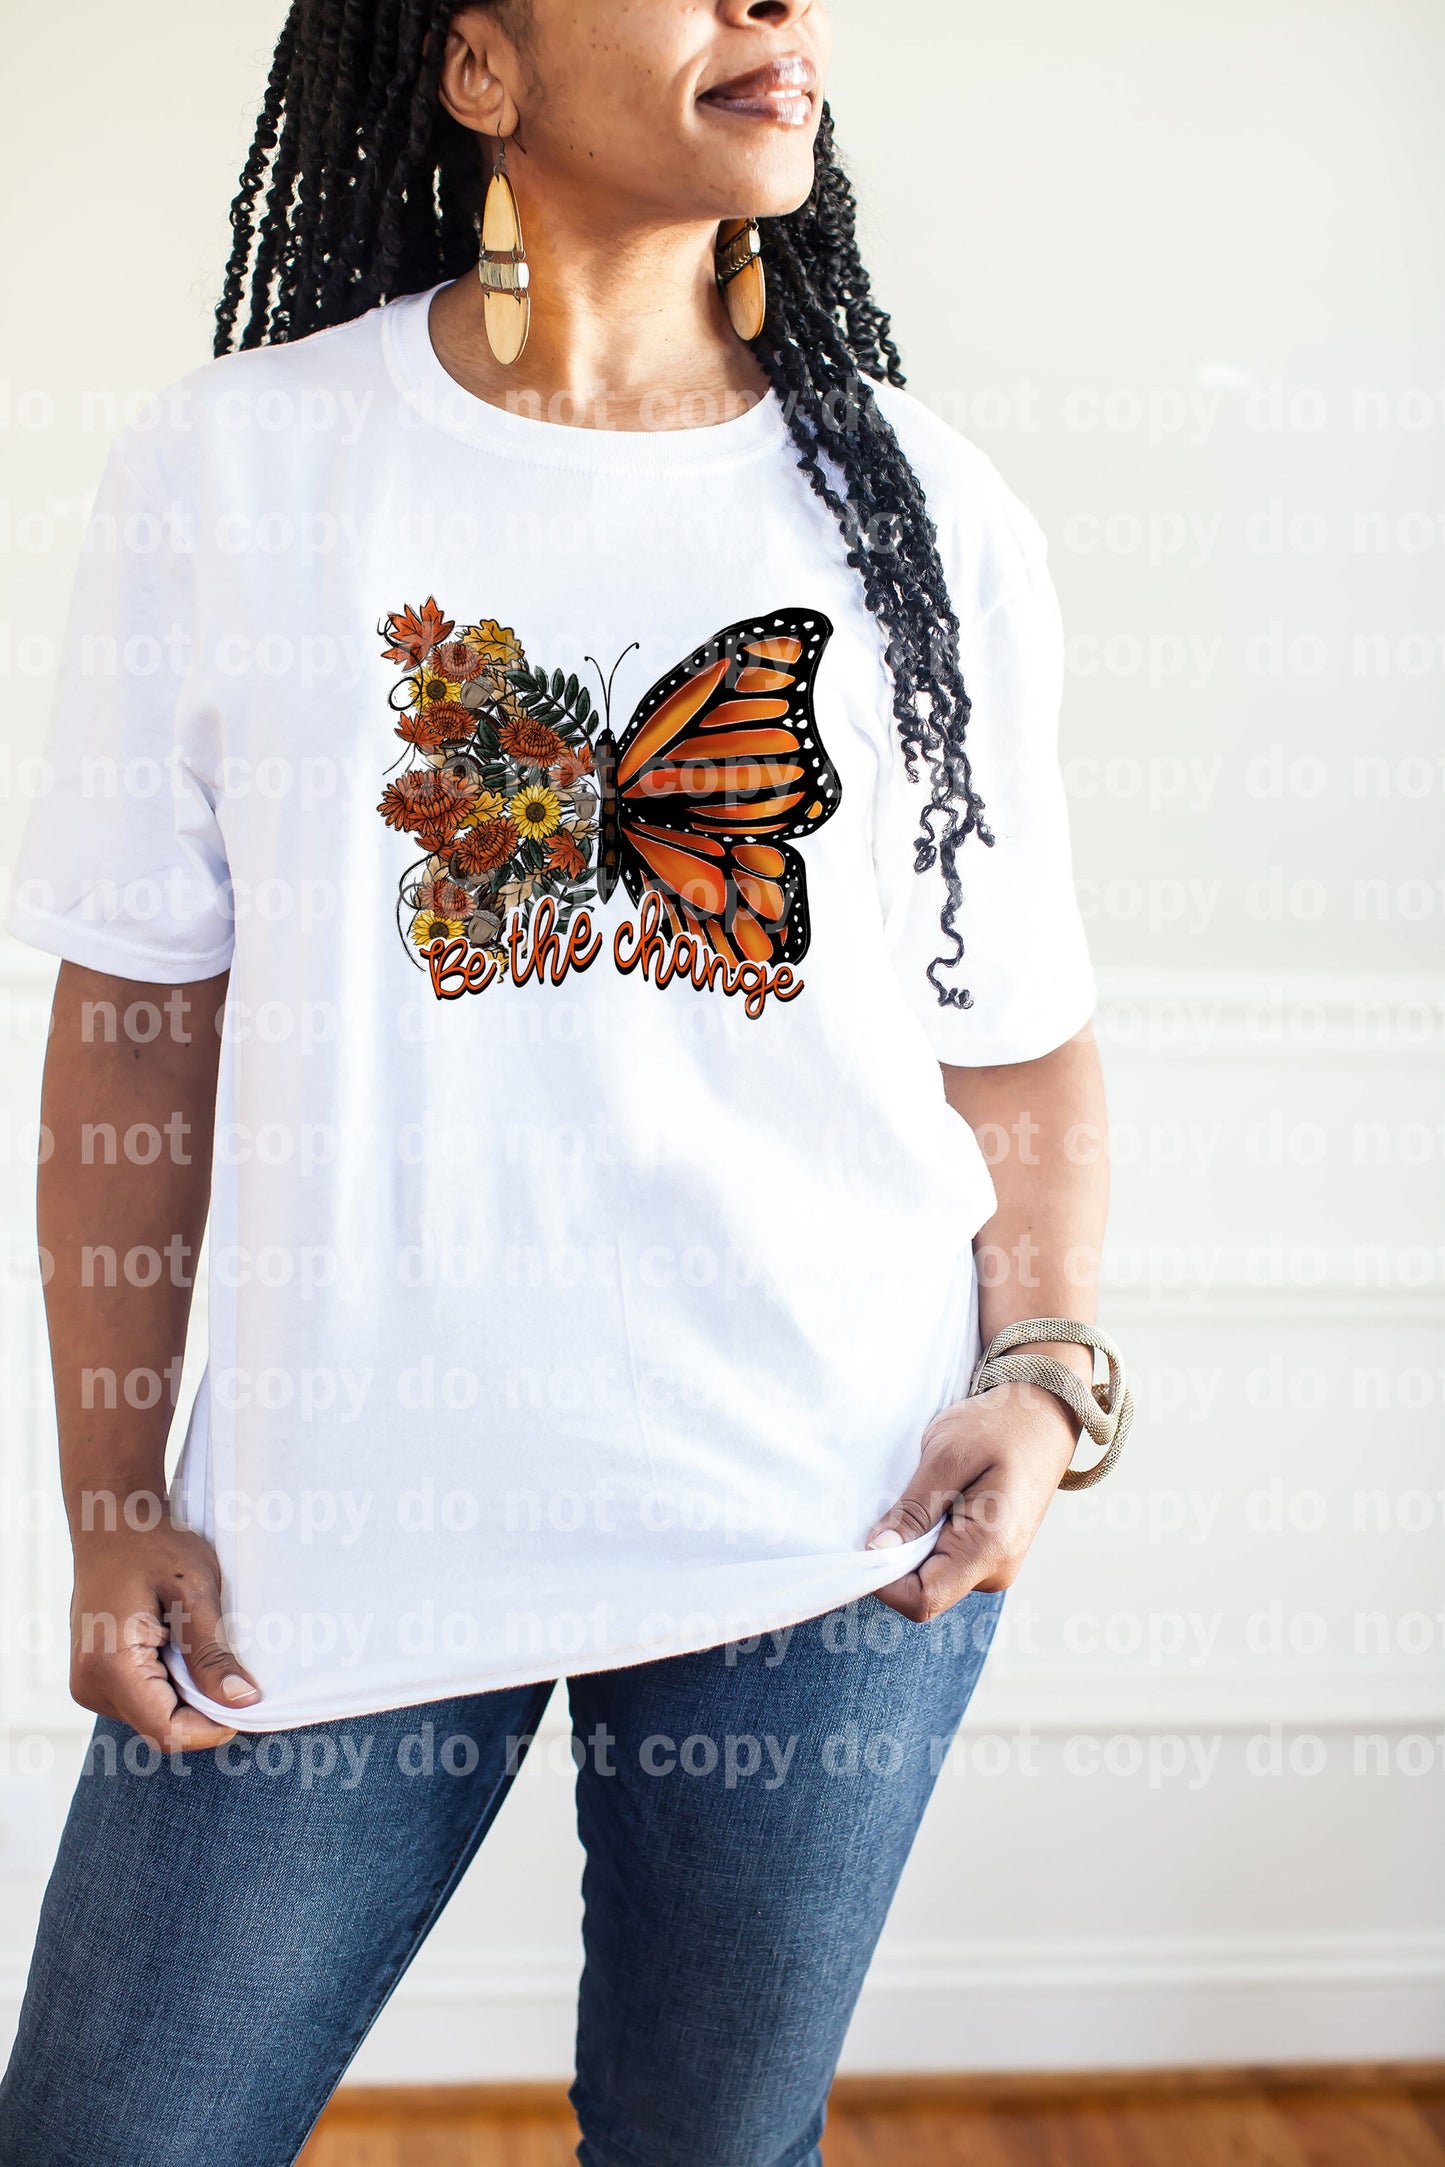 Be The Change Floral Butterfly Dream Print or Sublimation Print